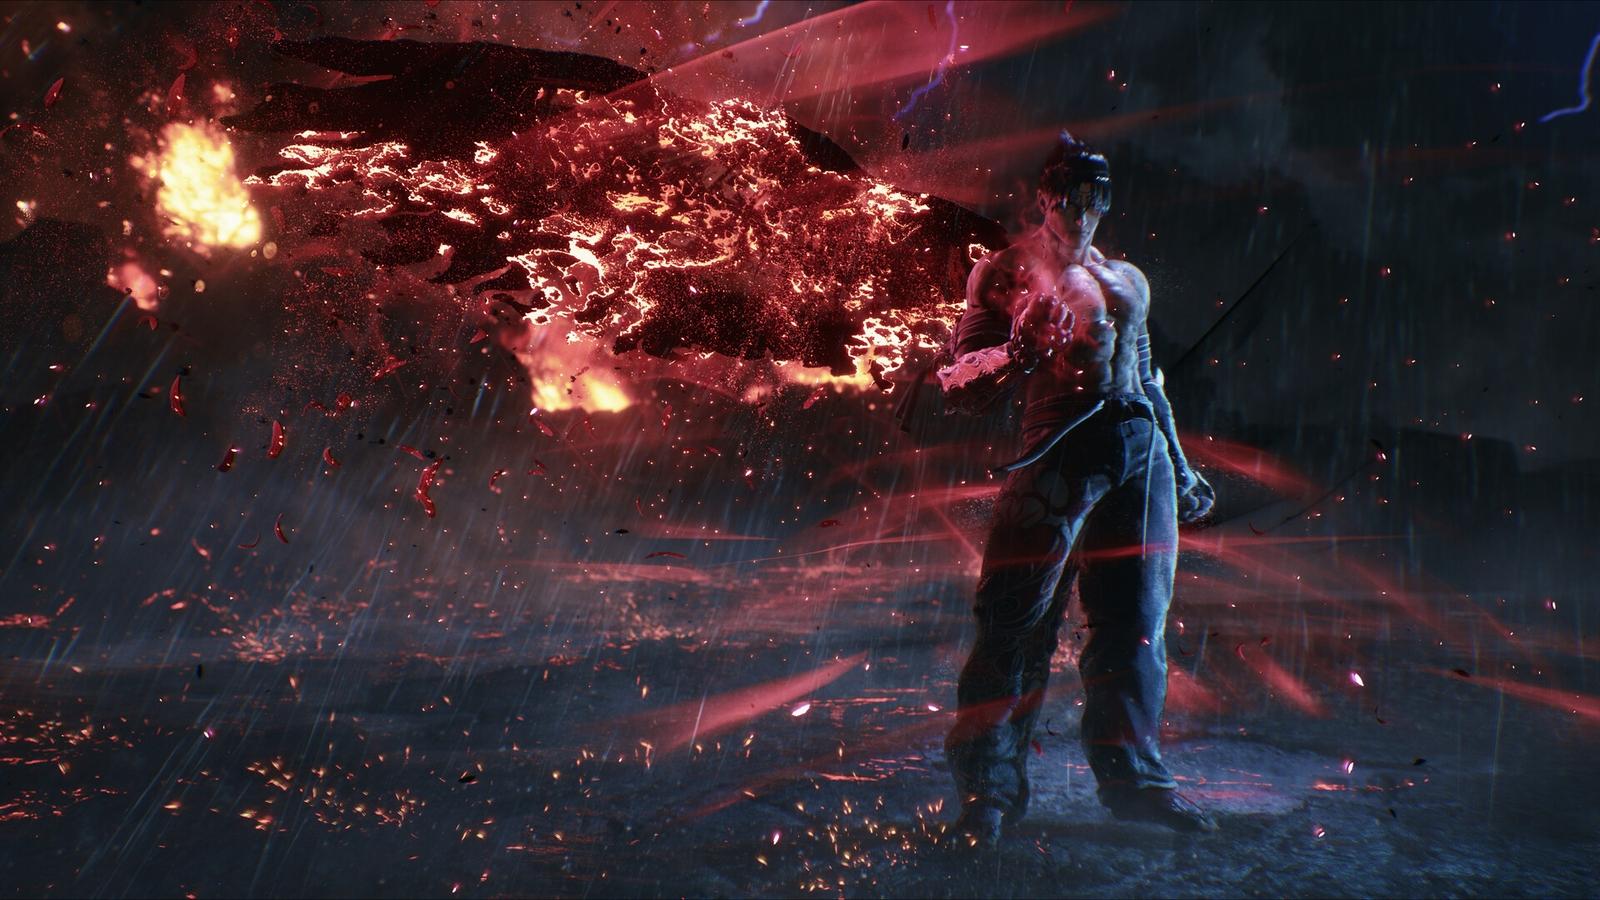 Tekken 8 players to receive pre-release ban for playing illegal